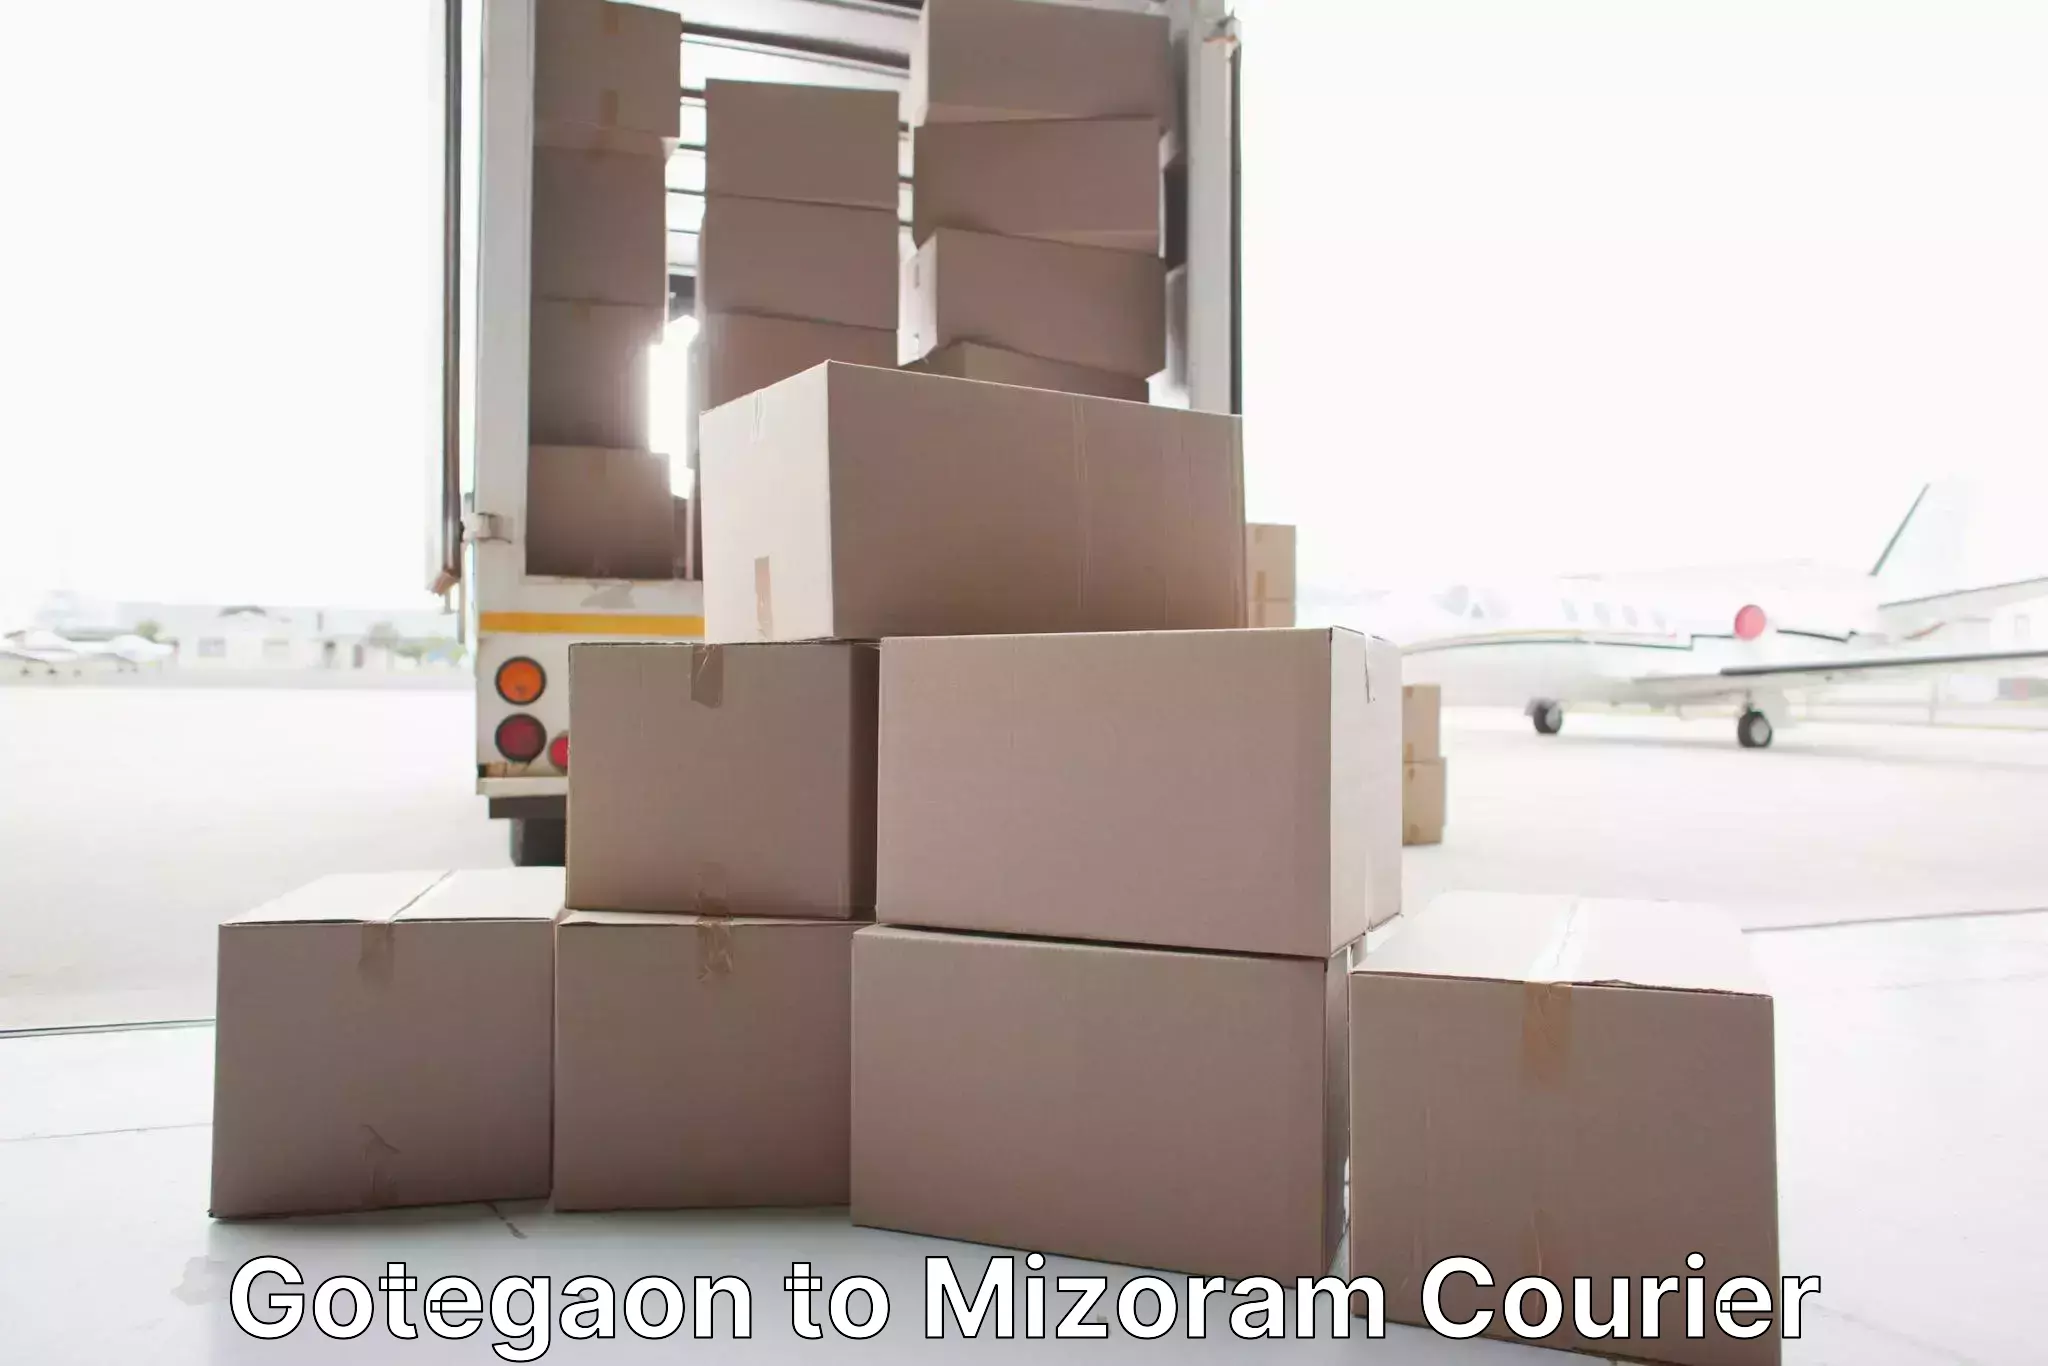 Home goods moving company in Gotegaon to Mizoram